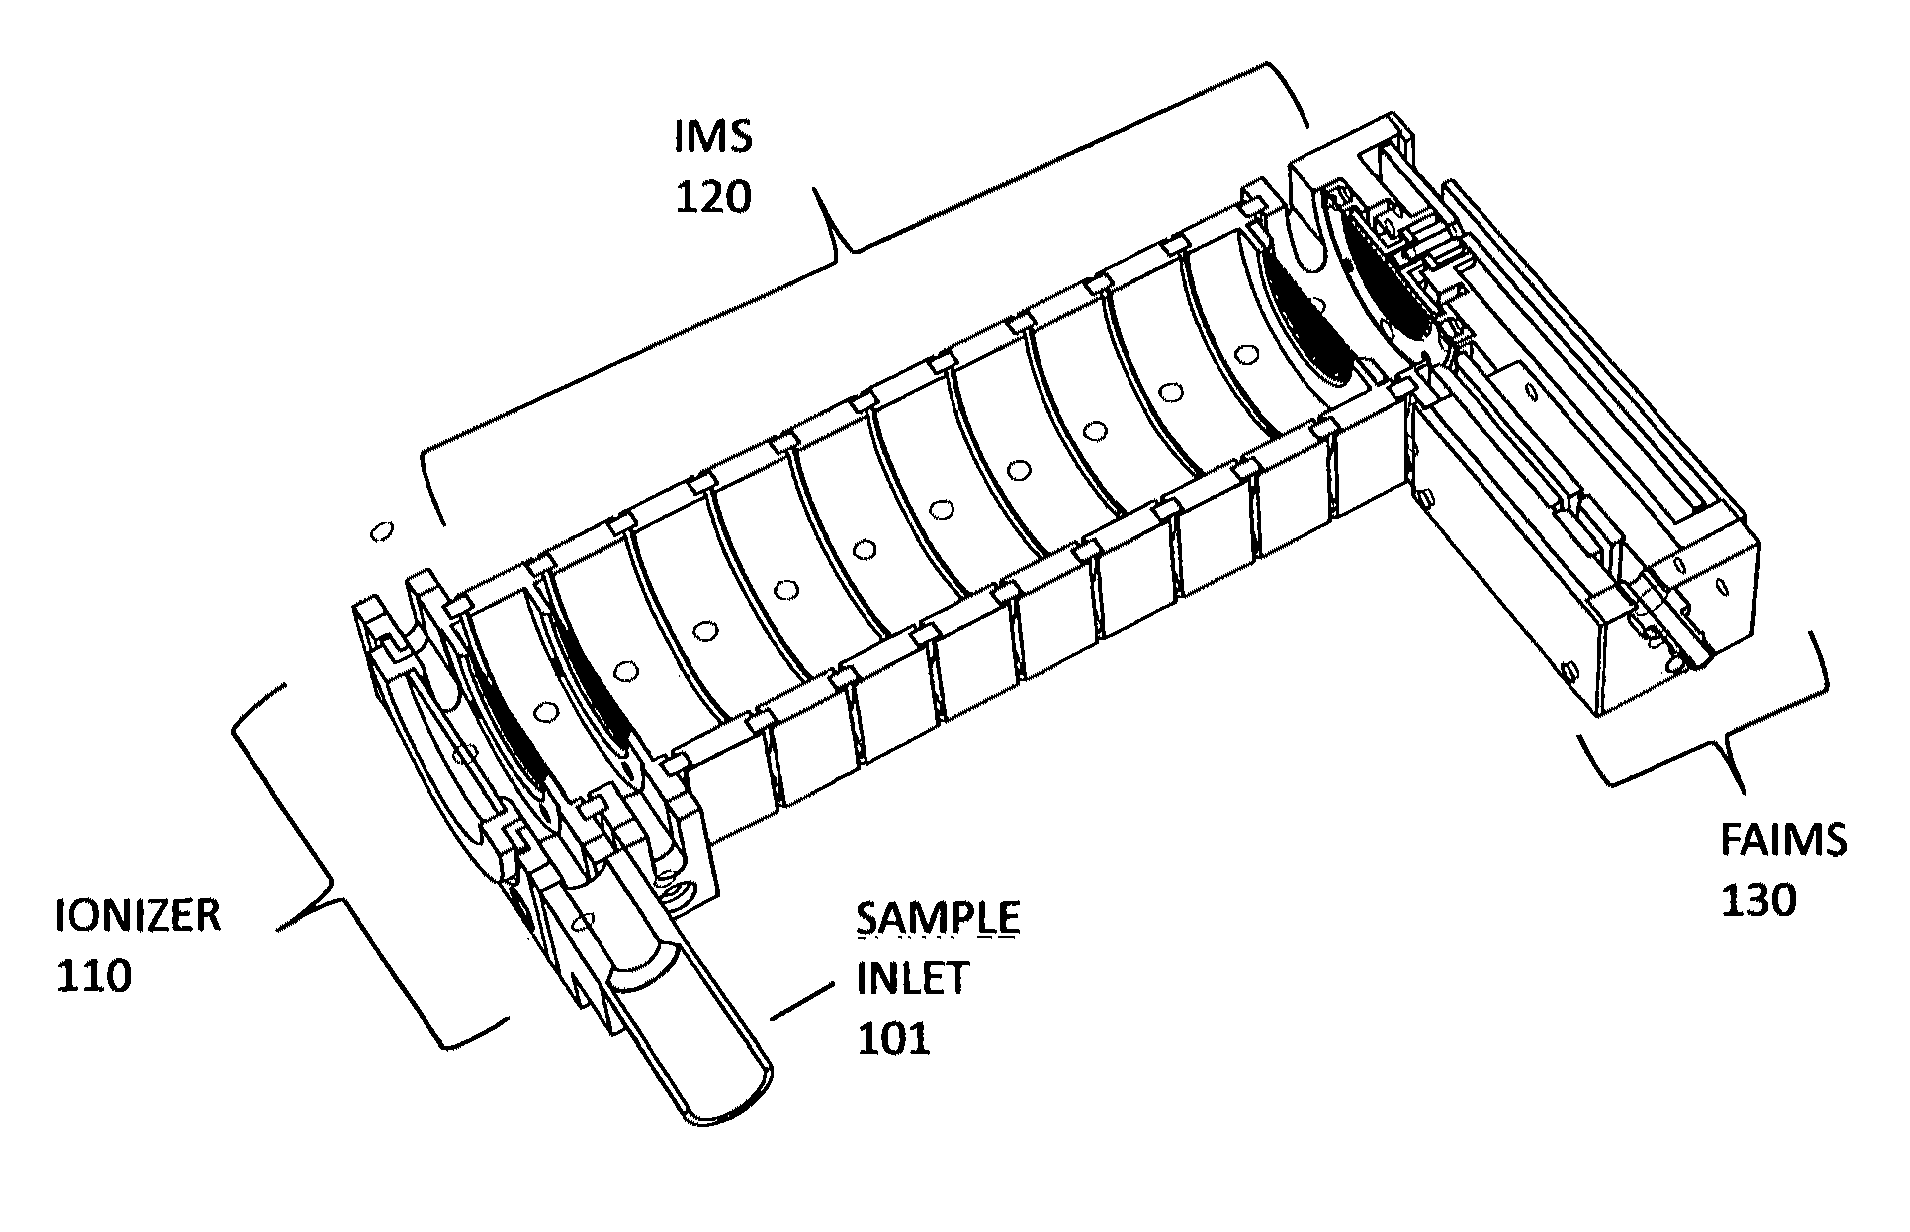 Ion mobility spectrometer device with embedded faims